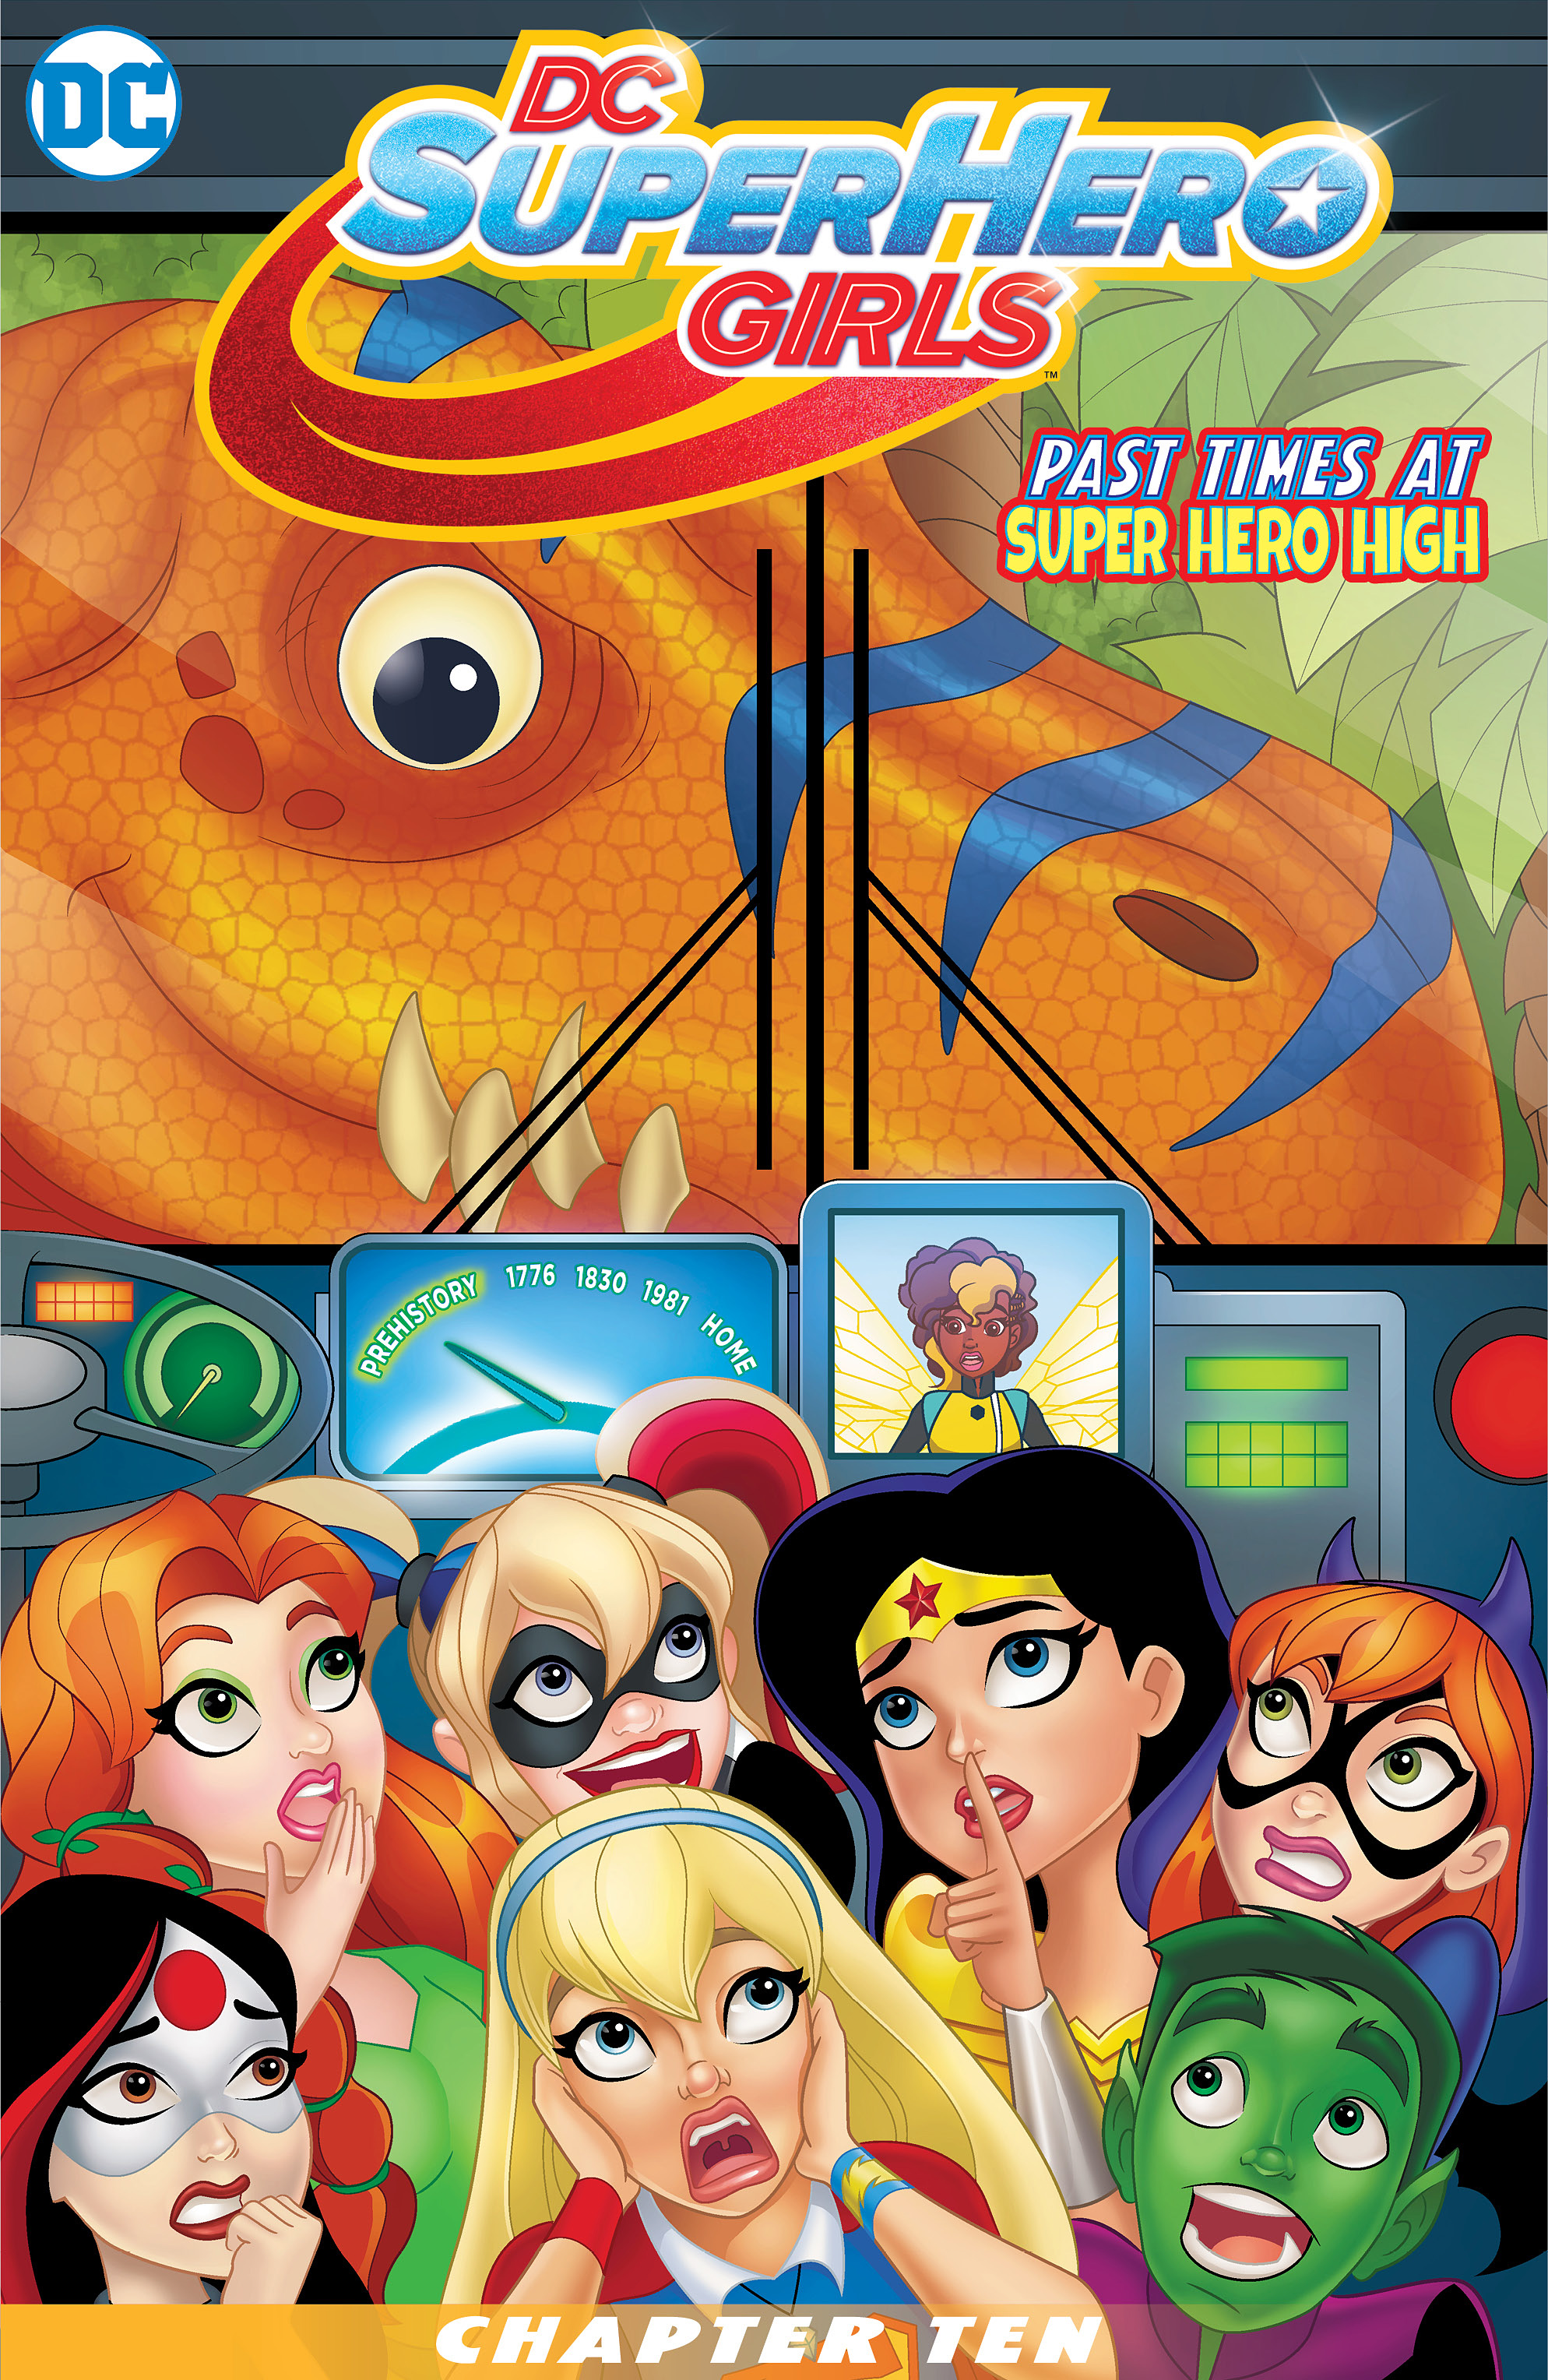 DC Super Hero Girls (2016-): Chapter 10 - Page 2